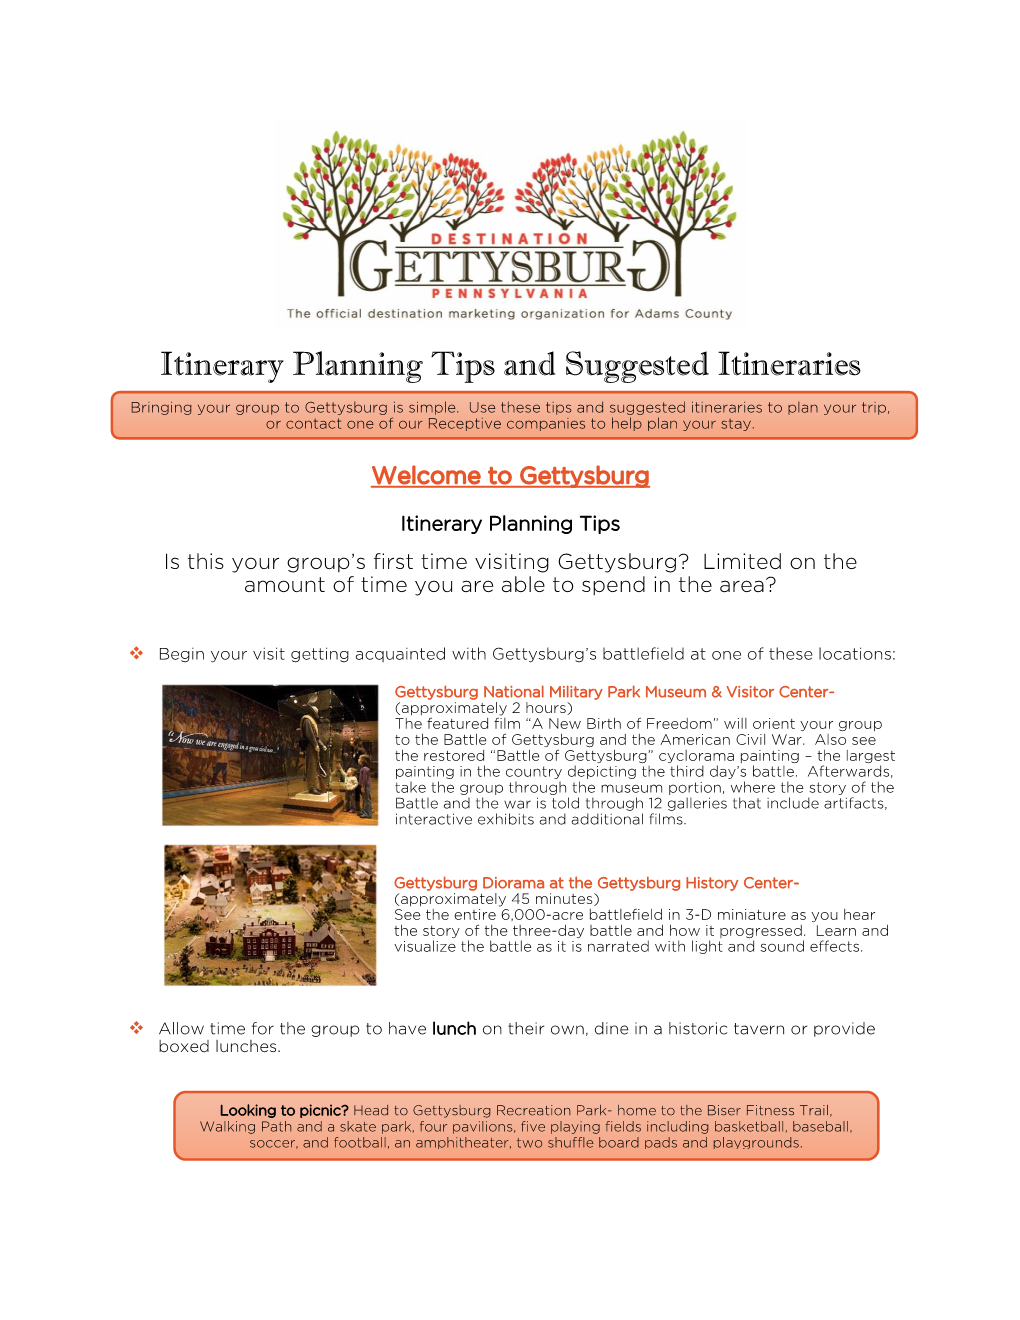 Itinerary Planning Tips and Suggested Itineraries